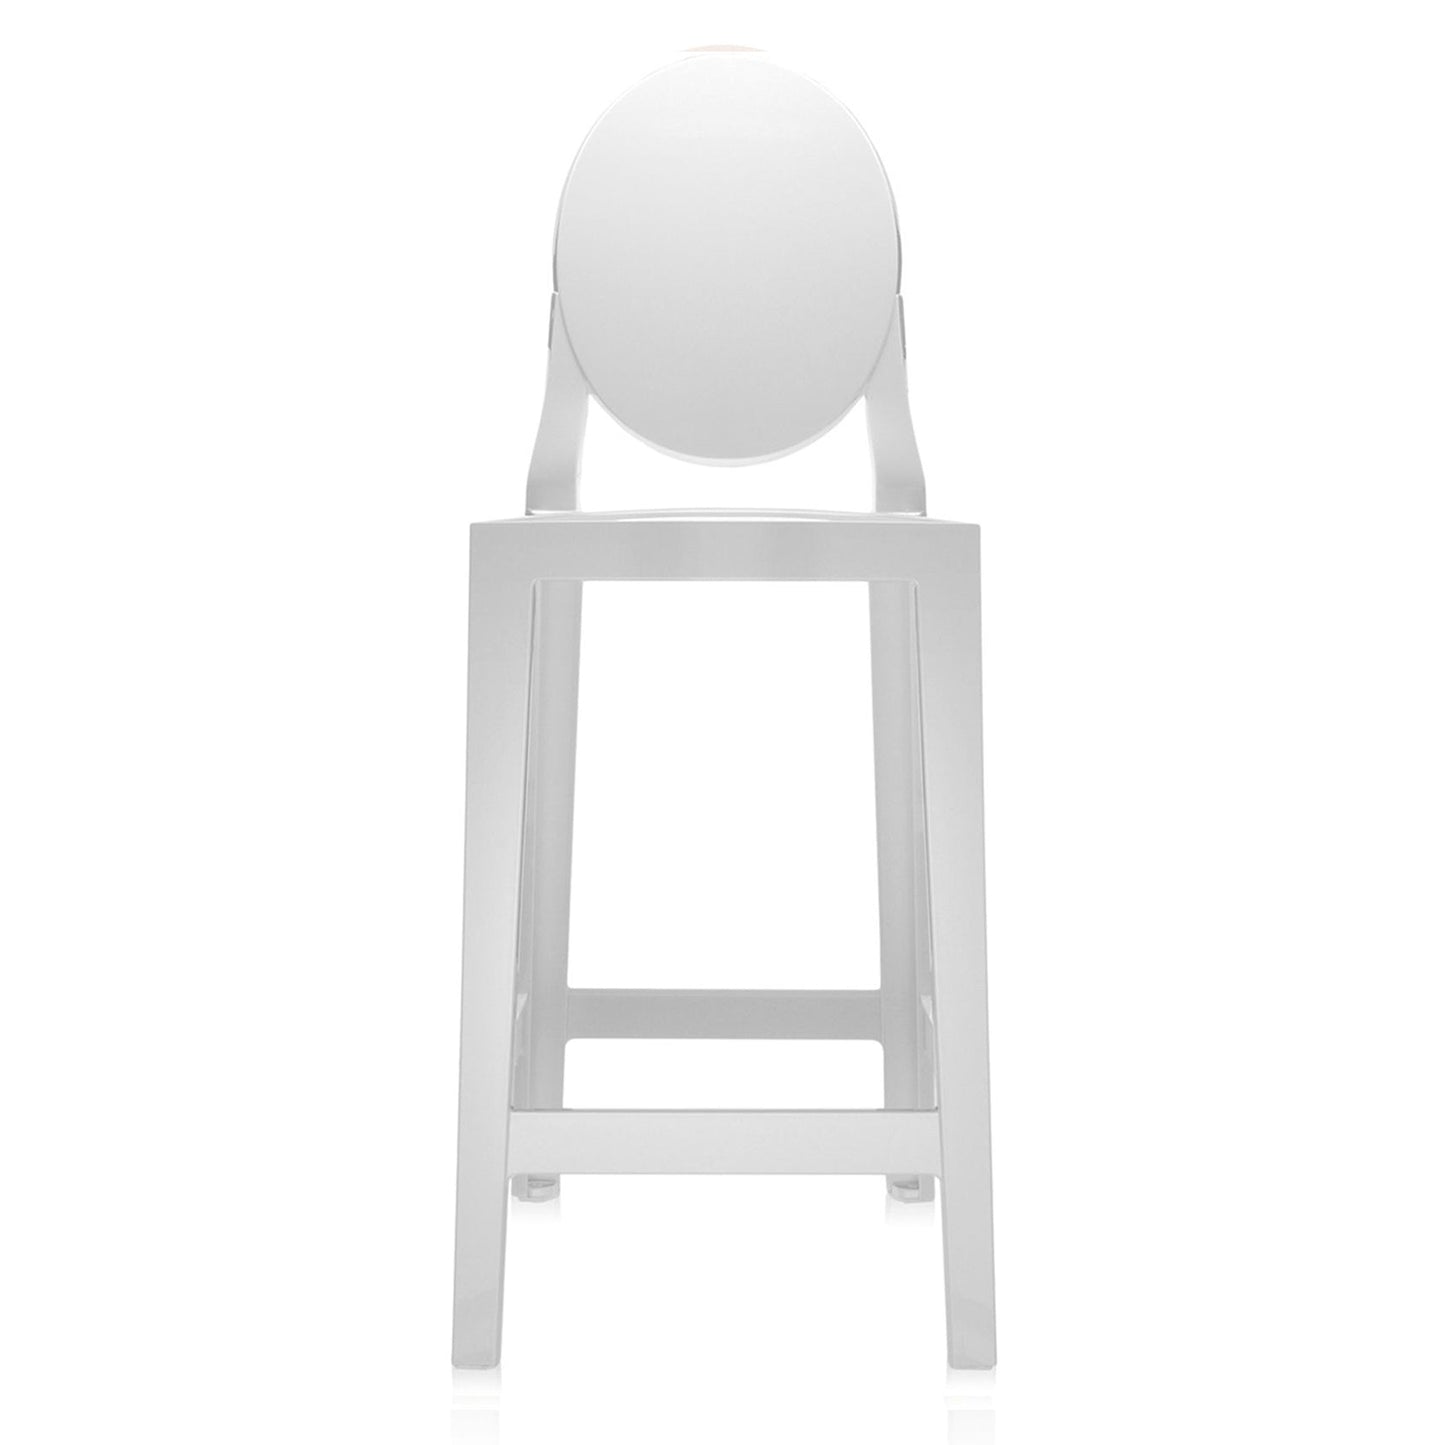 One More, One More Please Round Back Stool (Set of 2)